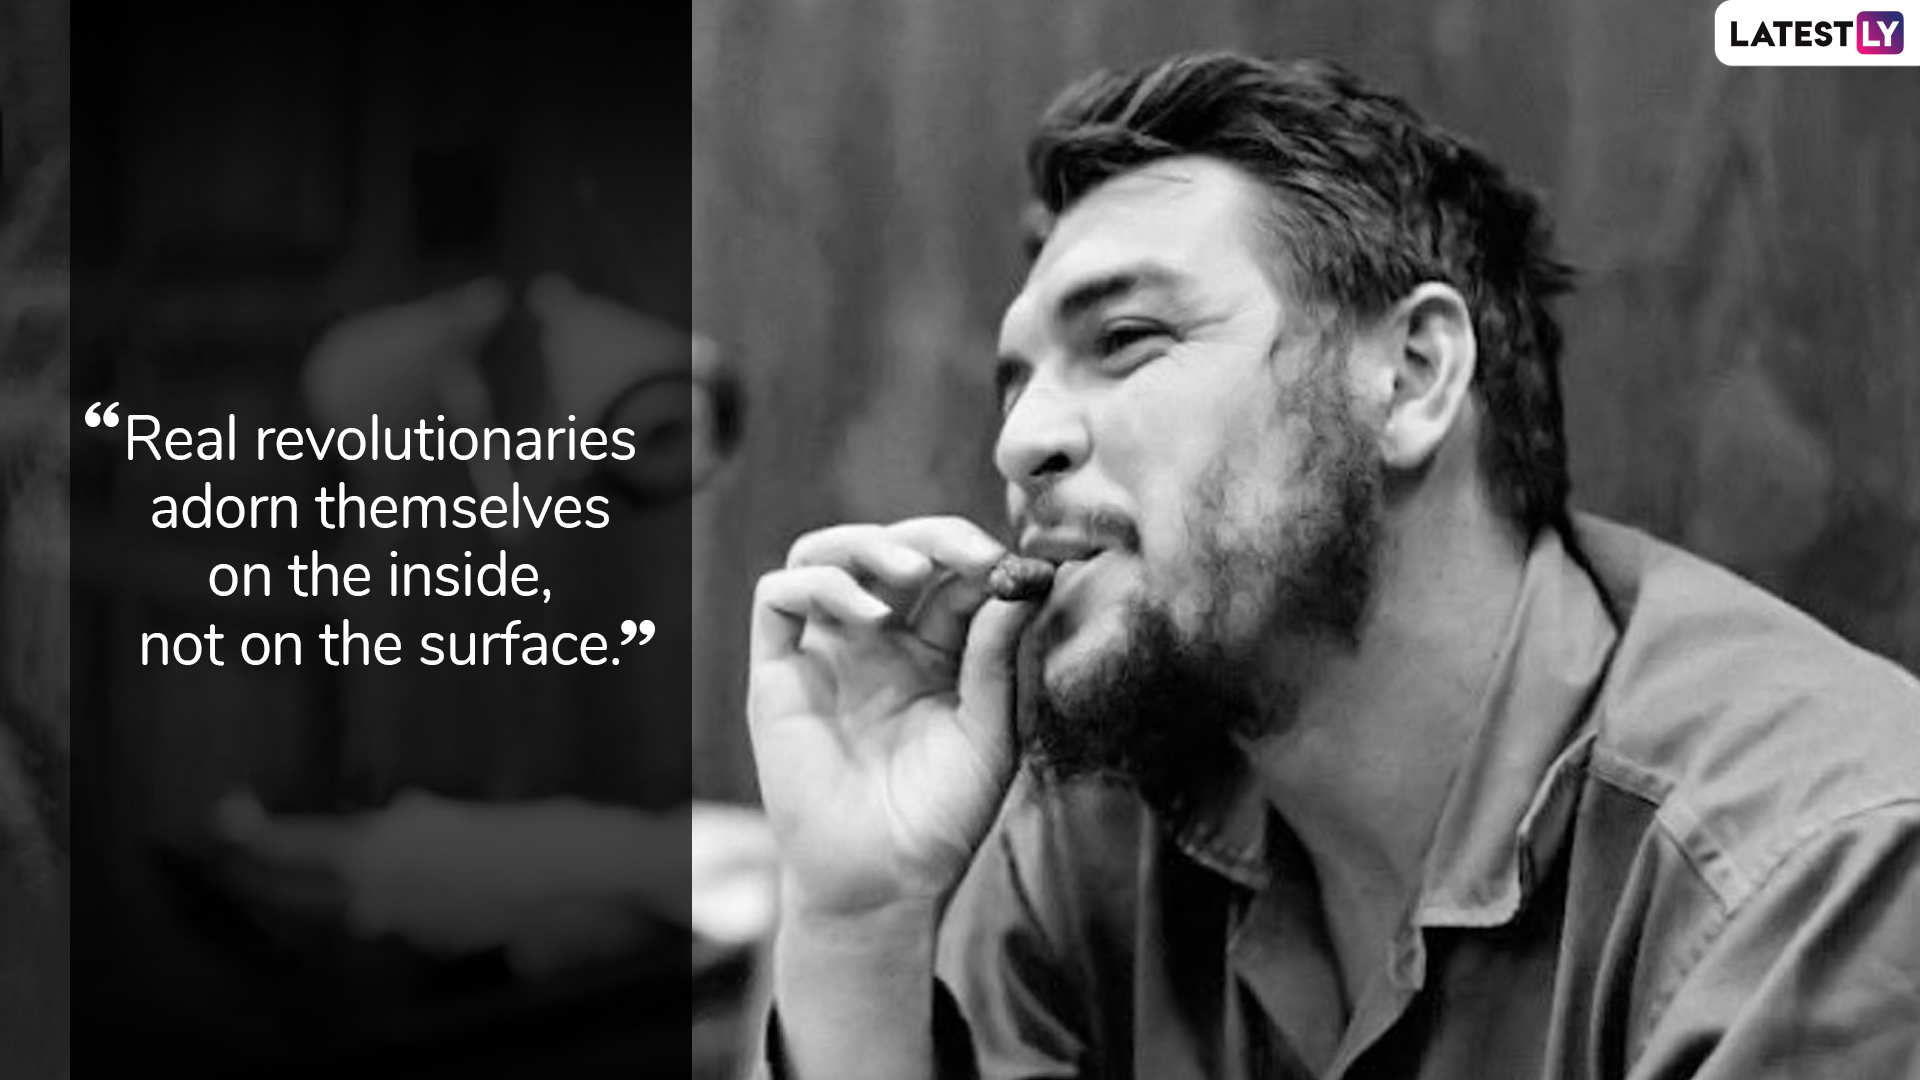  Che Guevara Quotes  Remembering the Marxist Revolutionary 